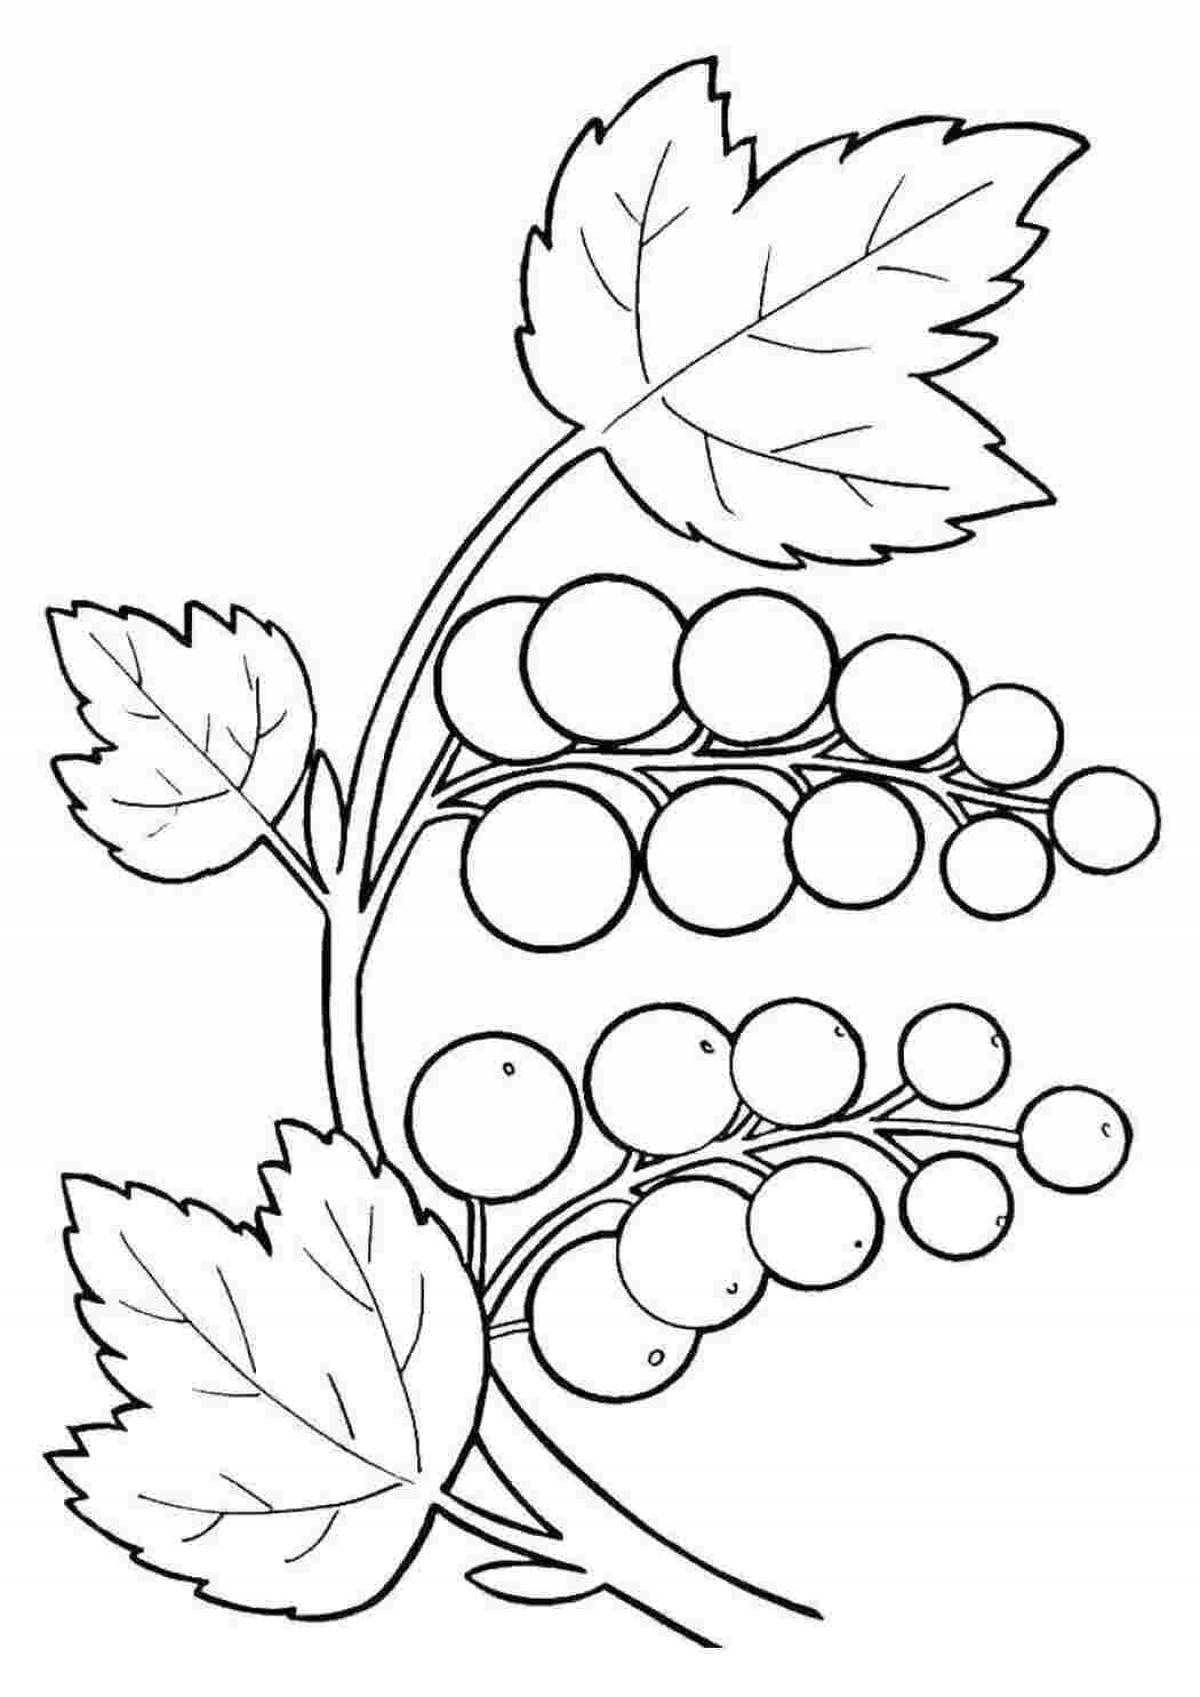 Attractive coloring pages Khokhloma patterns